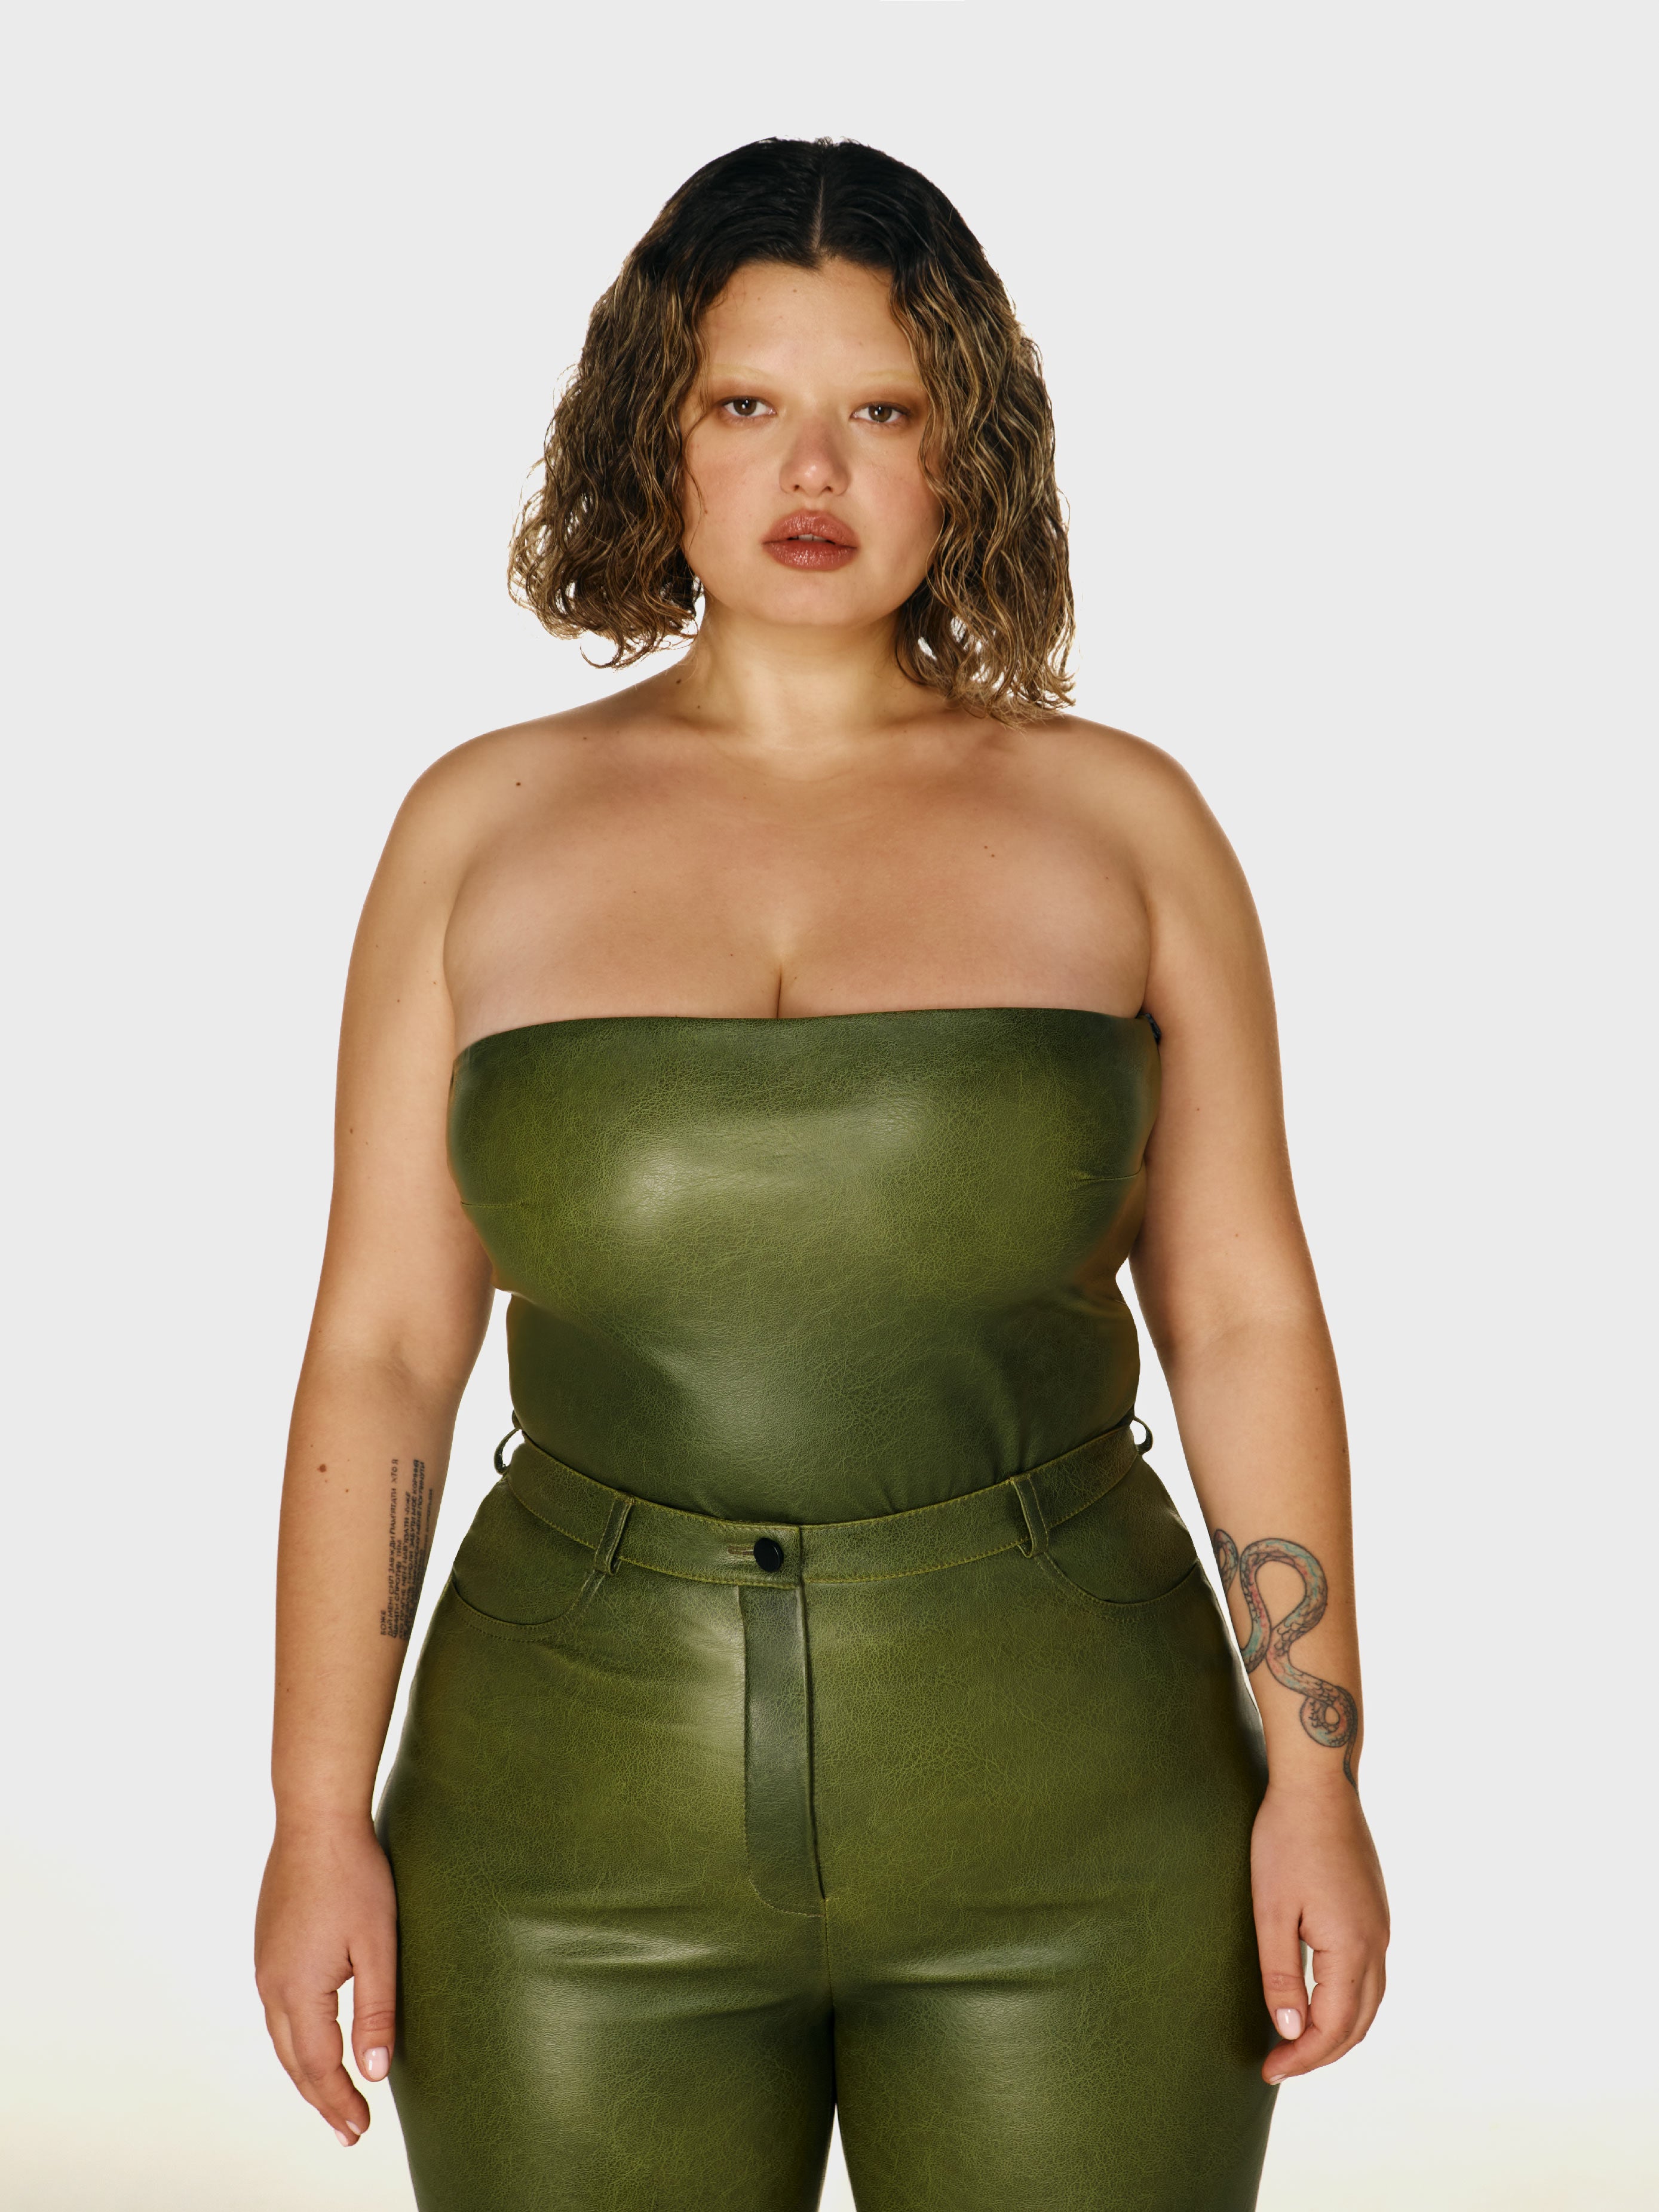 Cowboy shot of a girl in a green vegan leather tube top and green vegan leather high rise pants with straight leg